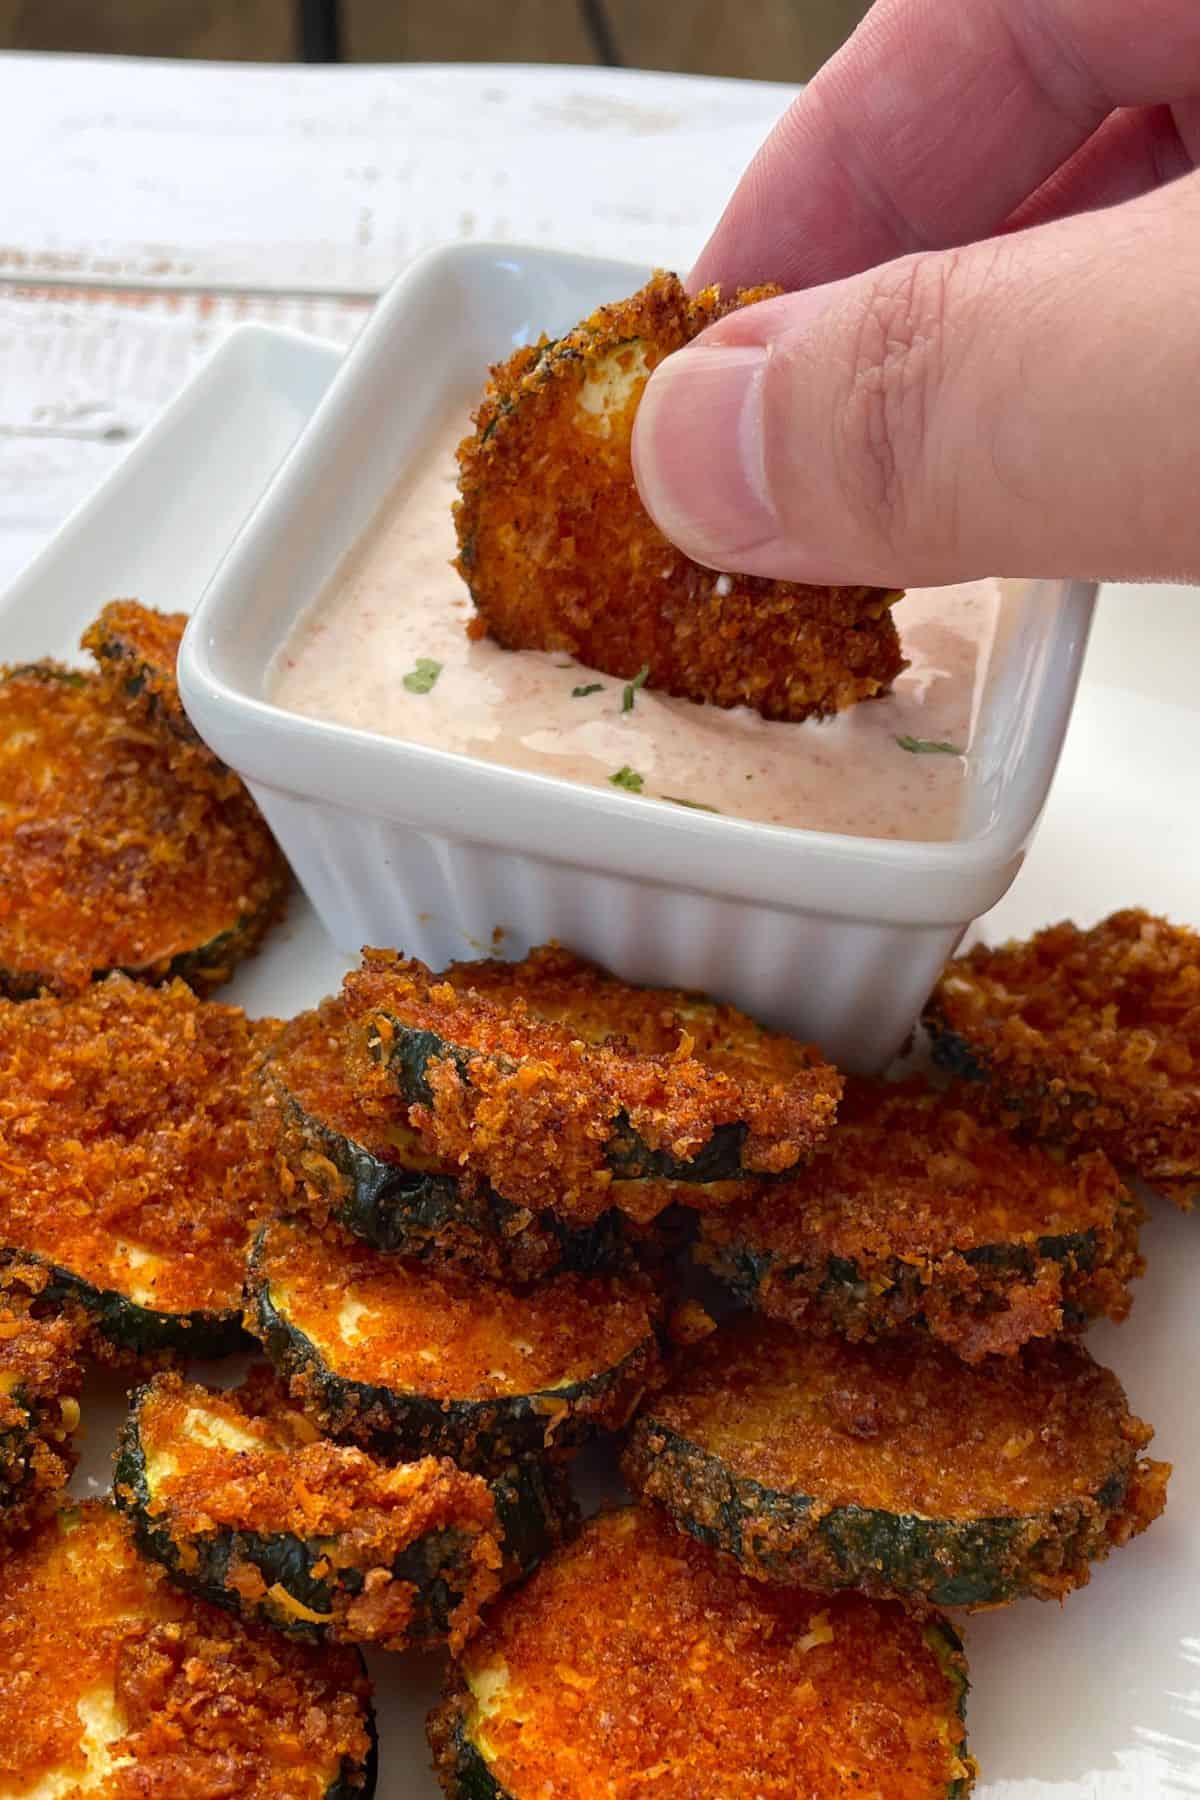 dipping an air fried zucchini keto chip into a bowl of dip.